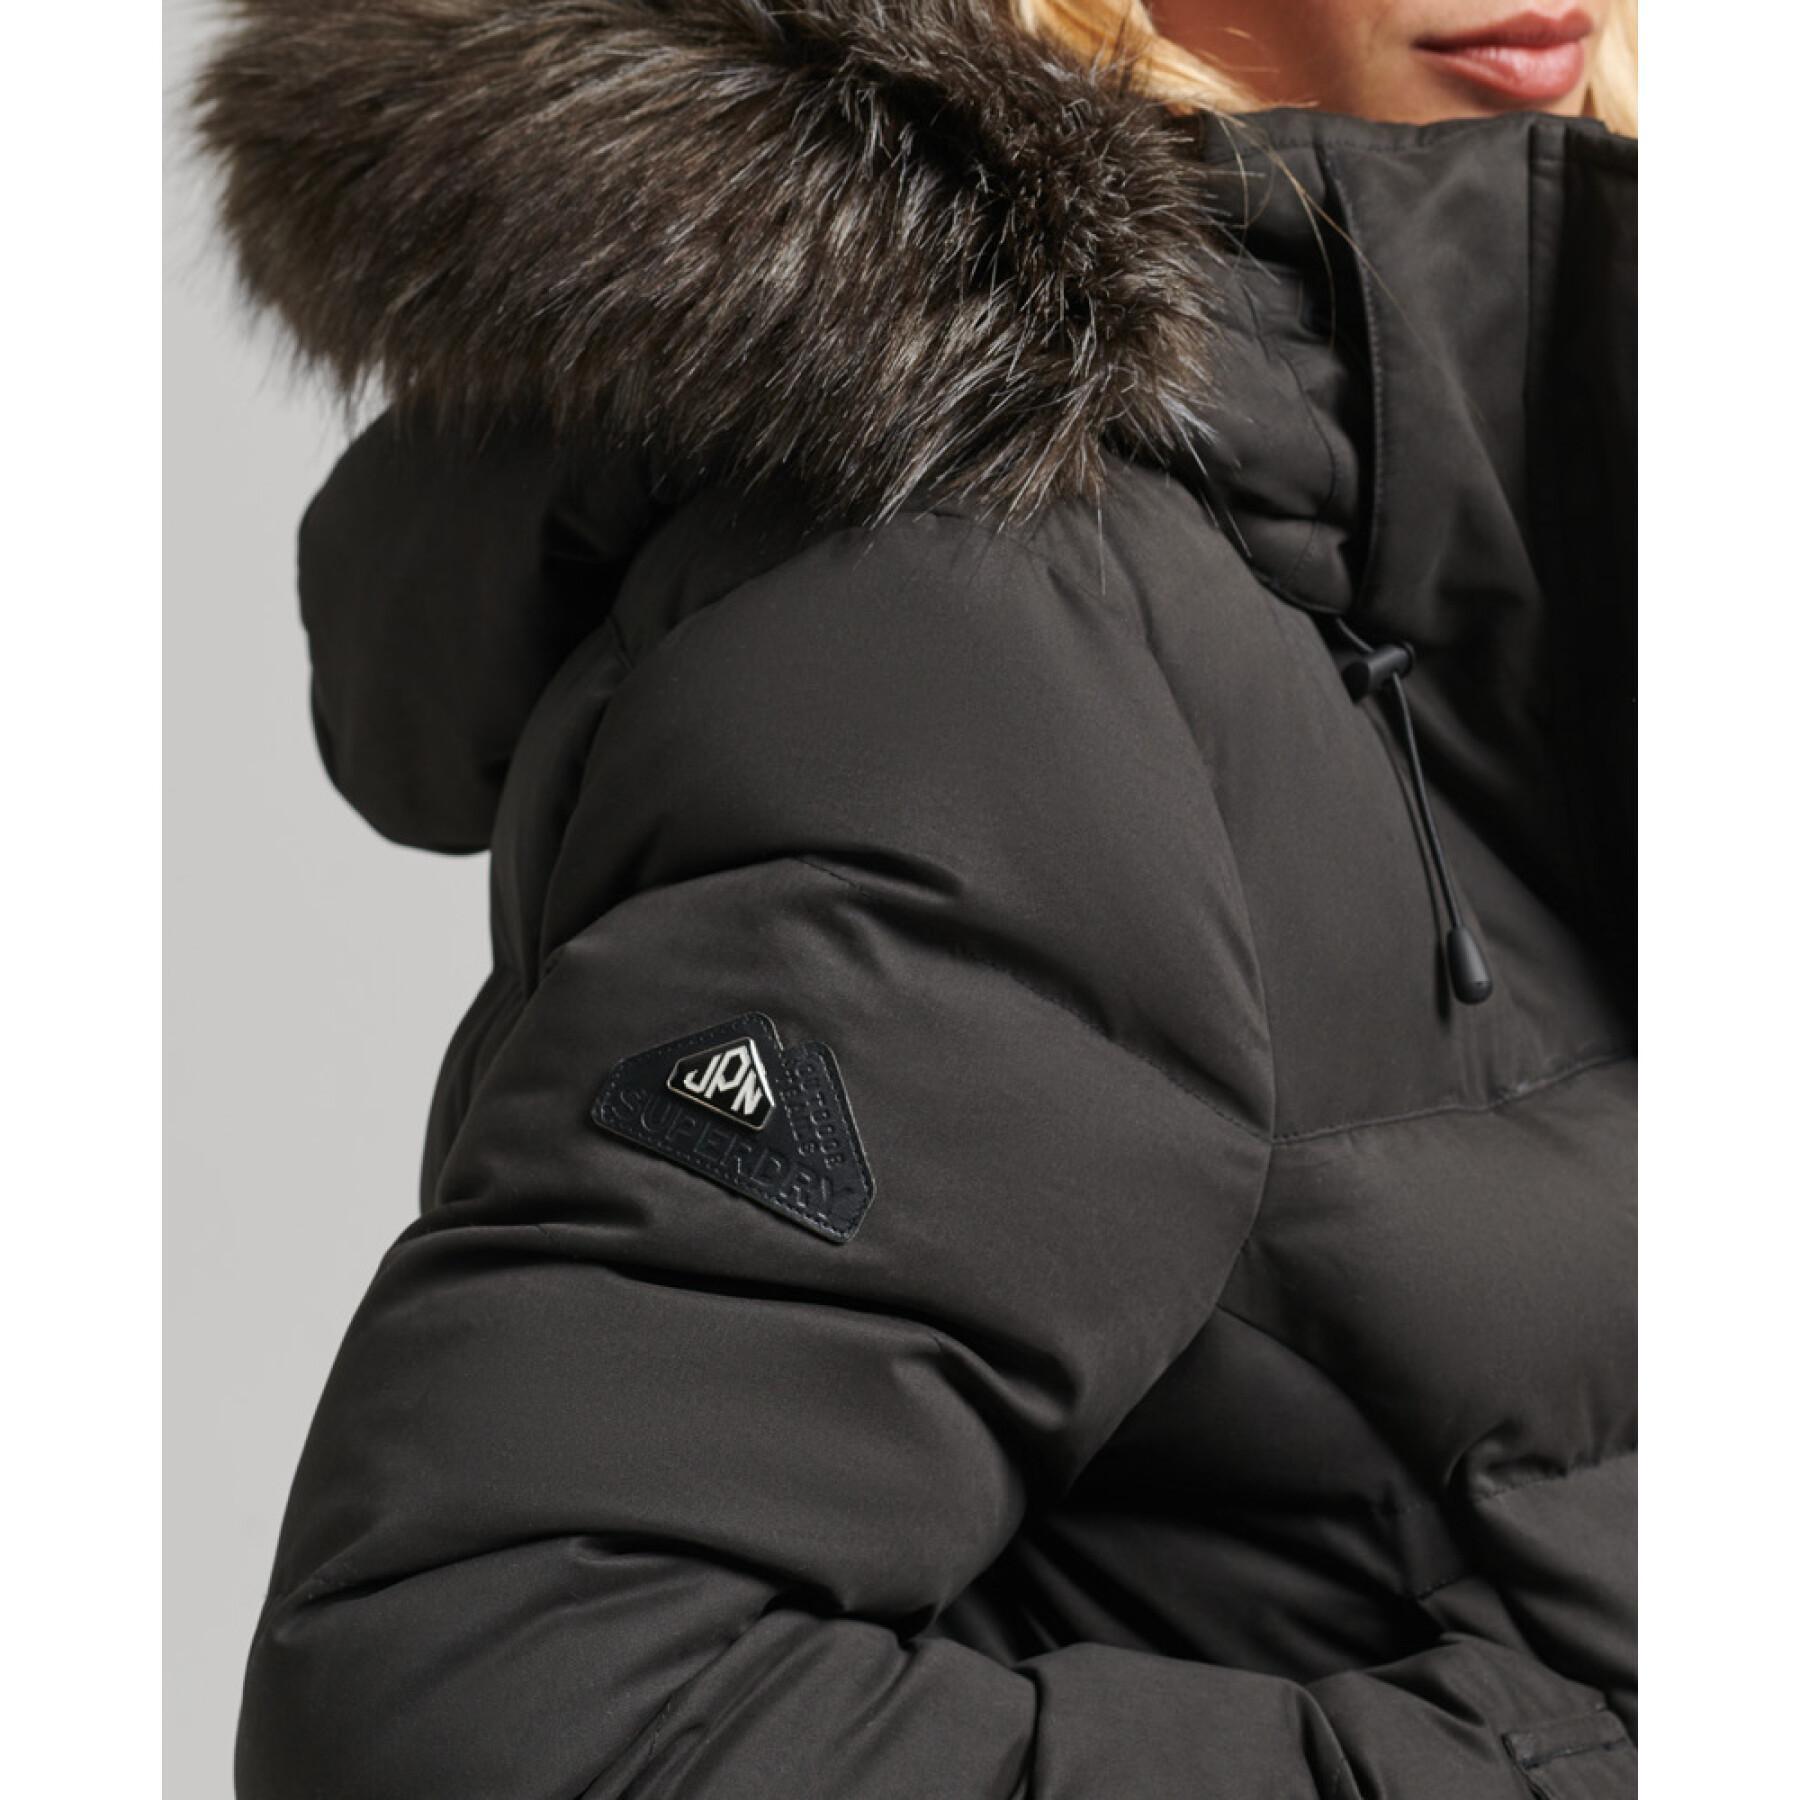 Women's long microfiber parka Superdry Expedition